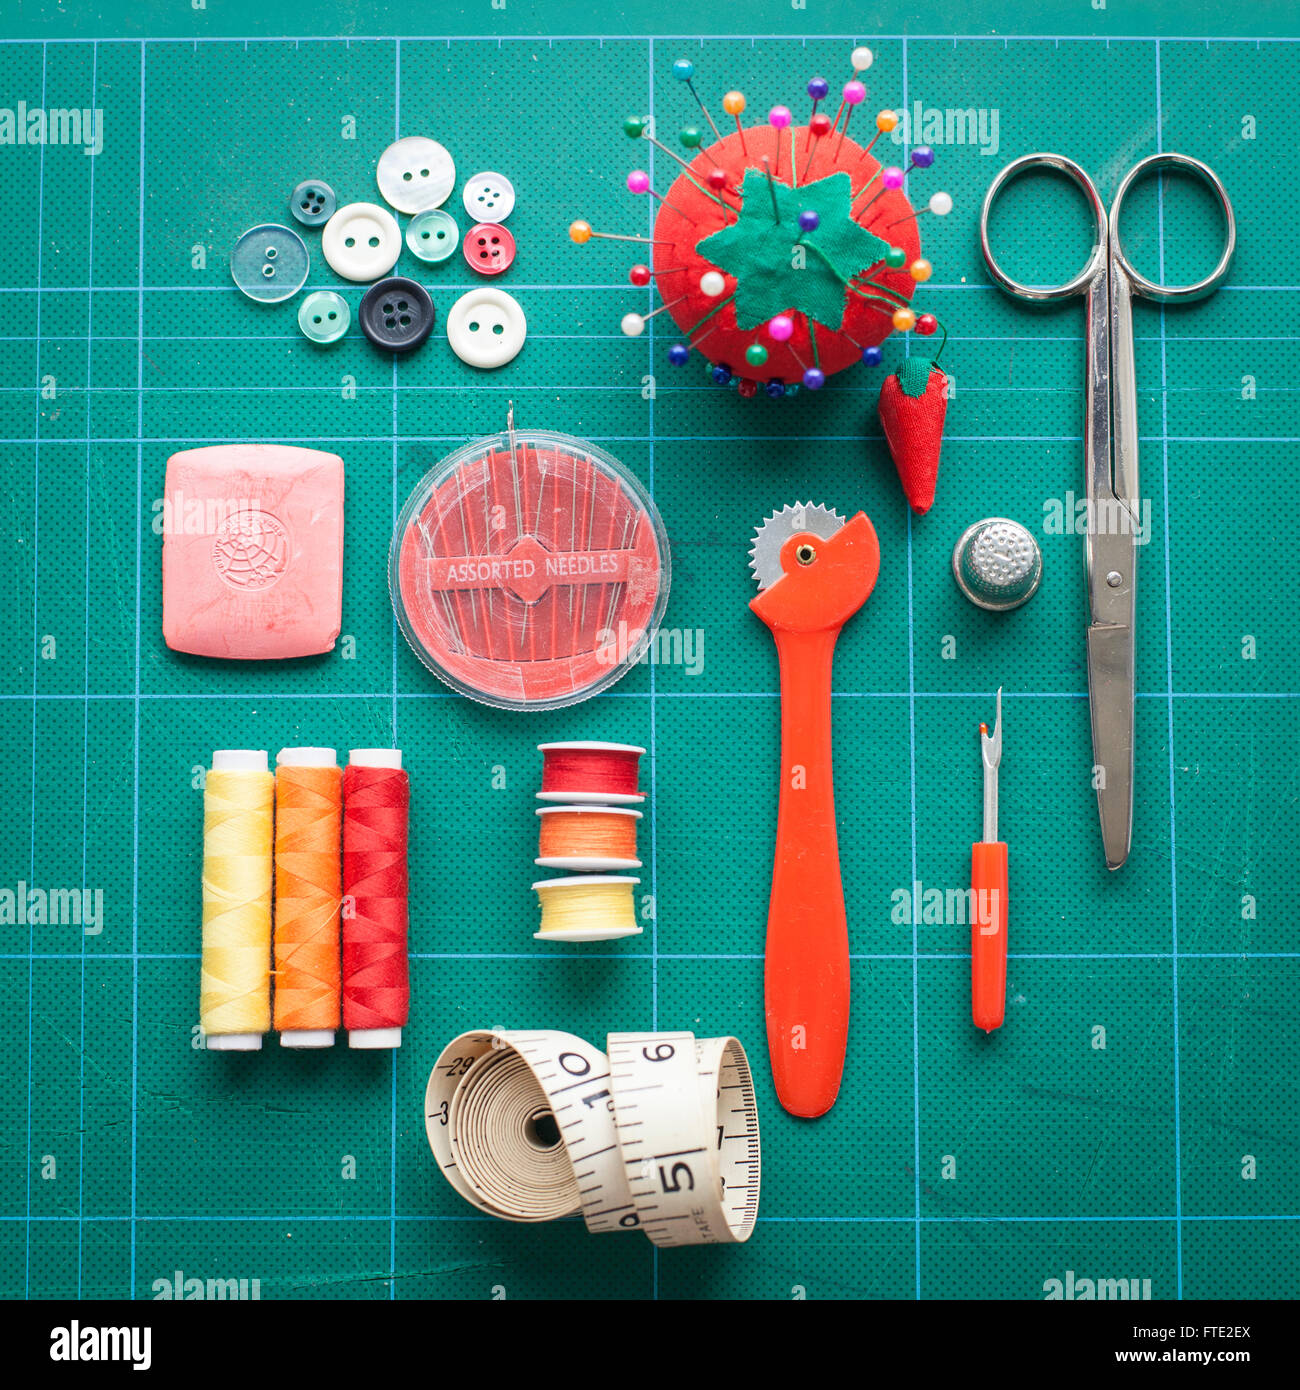 Sewing equipment arranged on a cutting mat Stock Photo